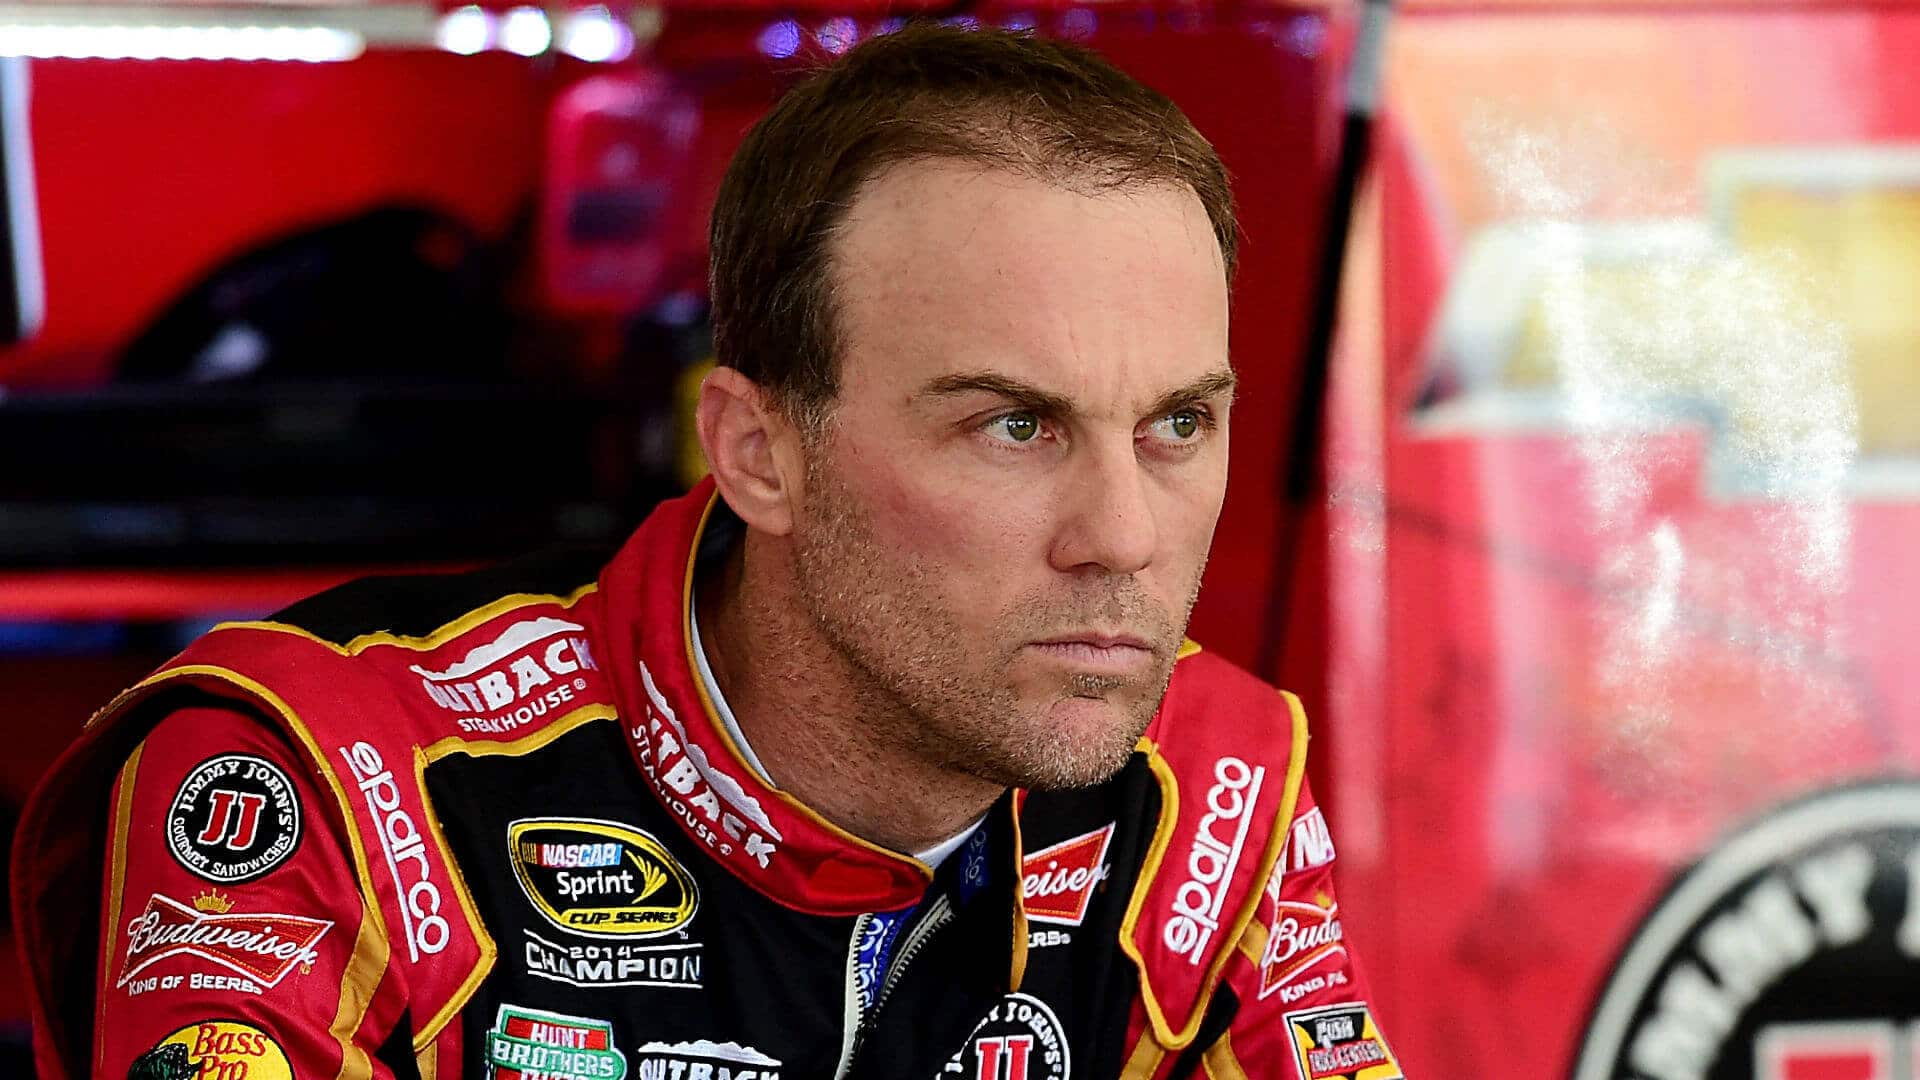 Kevin Harvick is the favorite to win the Kobalt 400 at the 2016 NASCAR Weekend